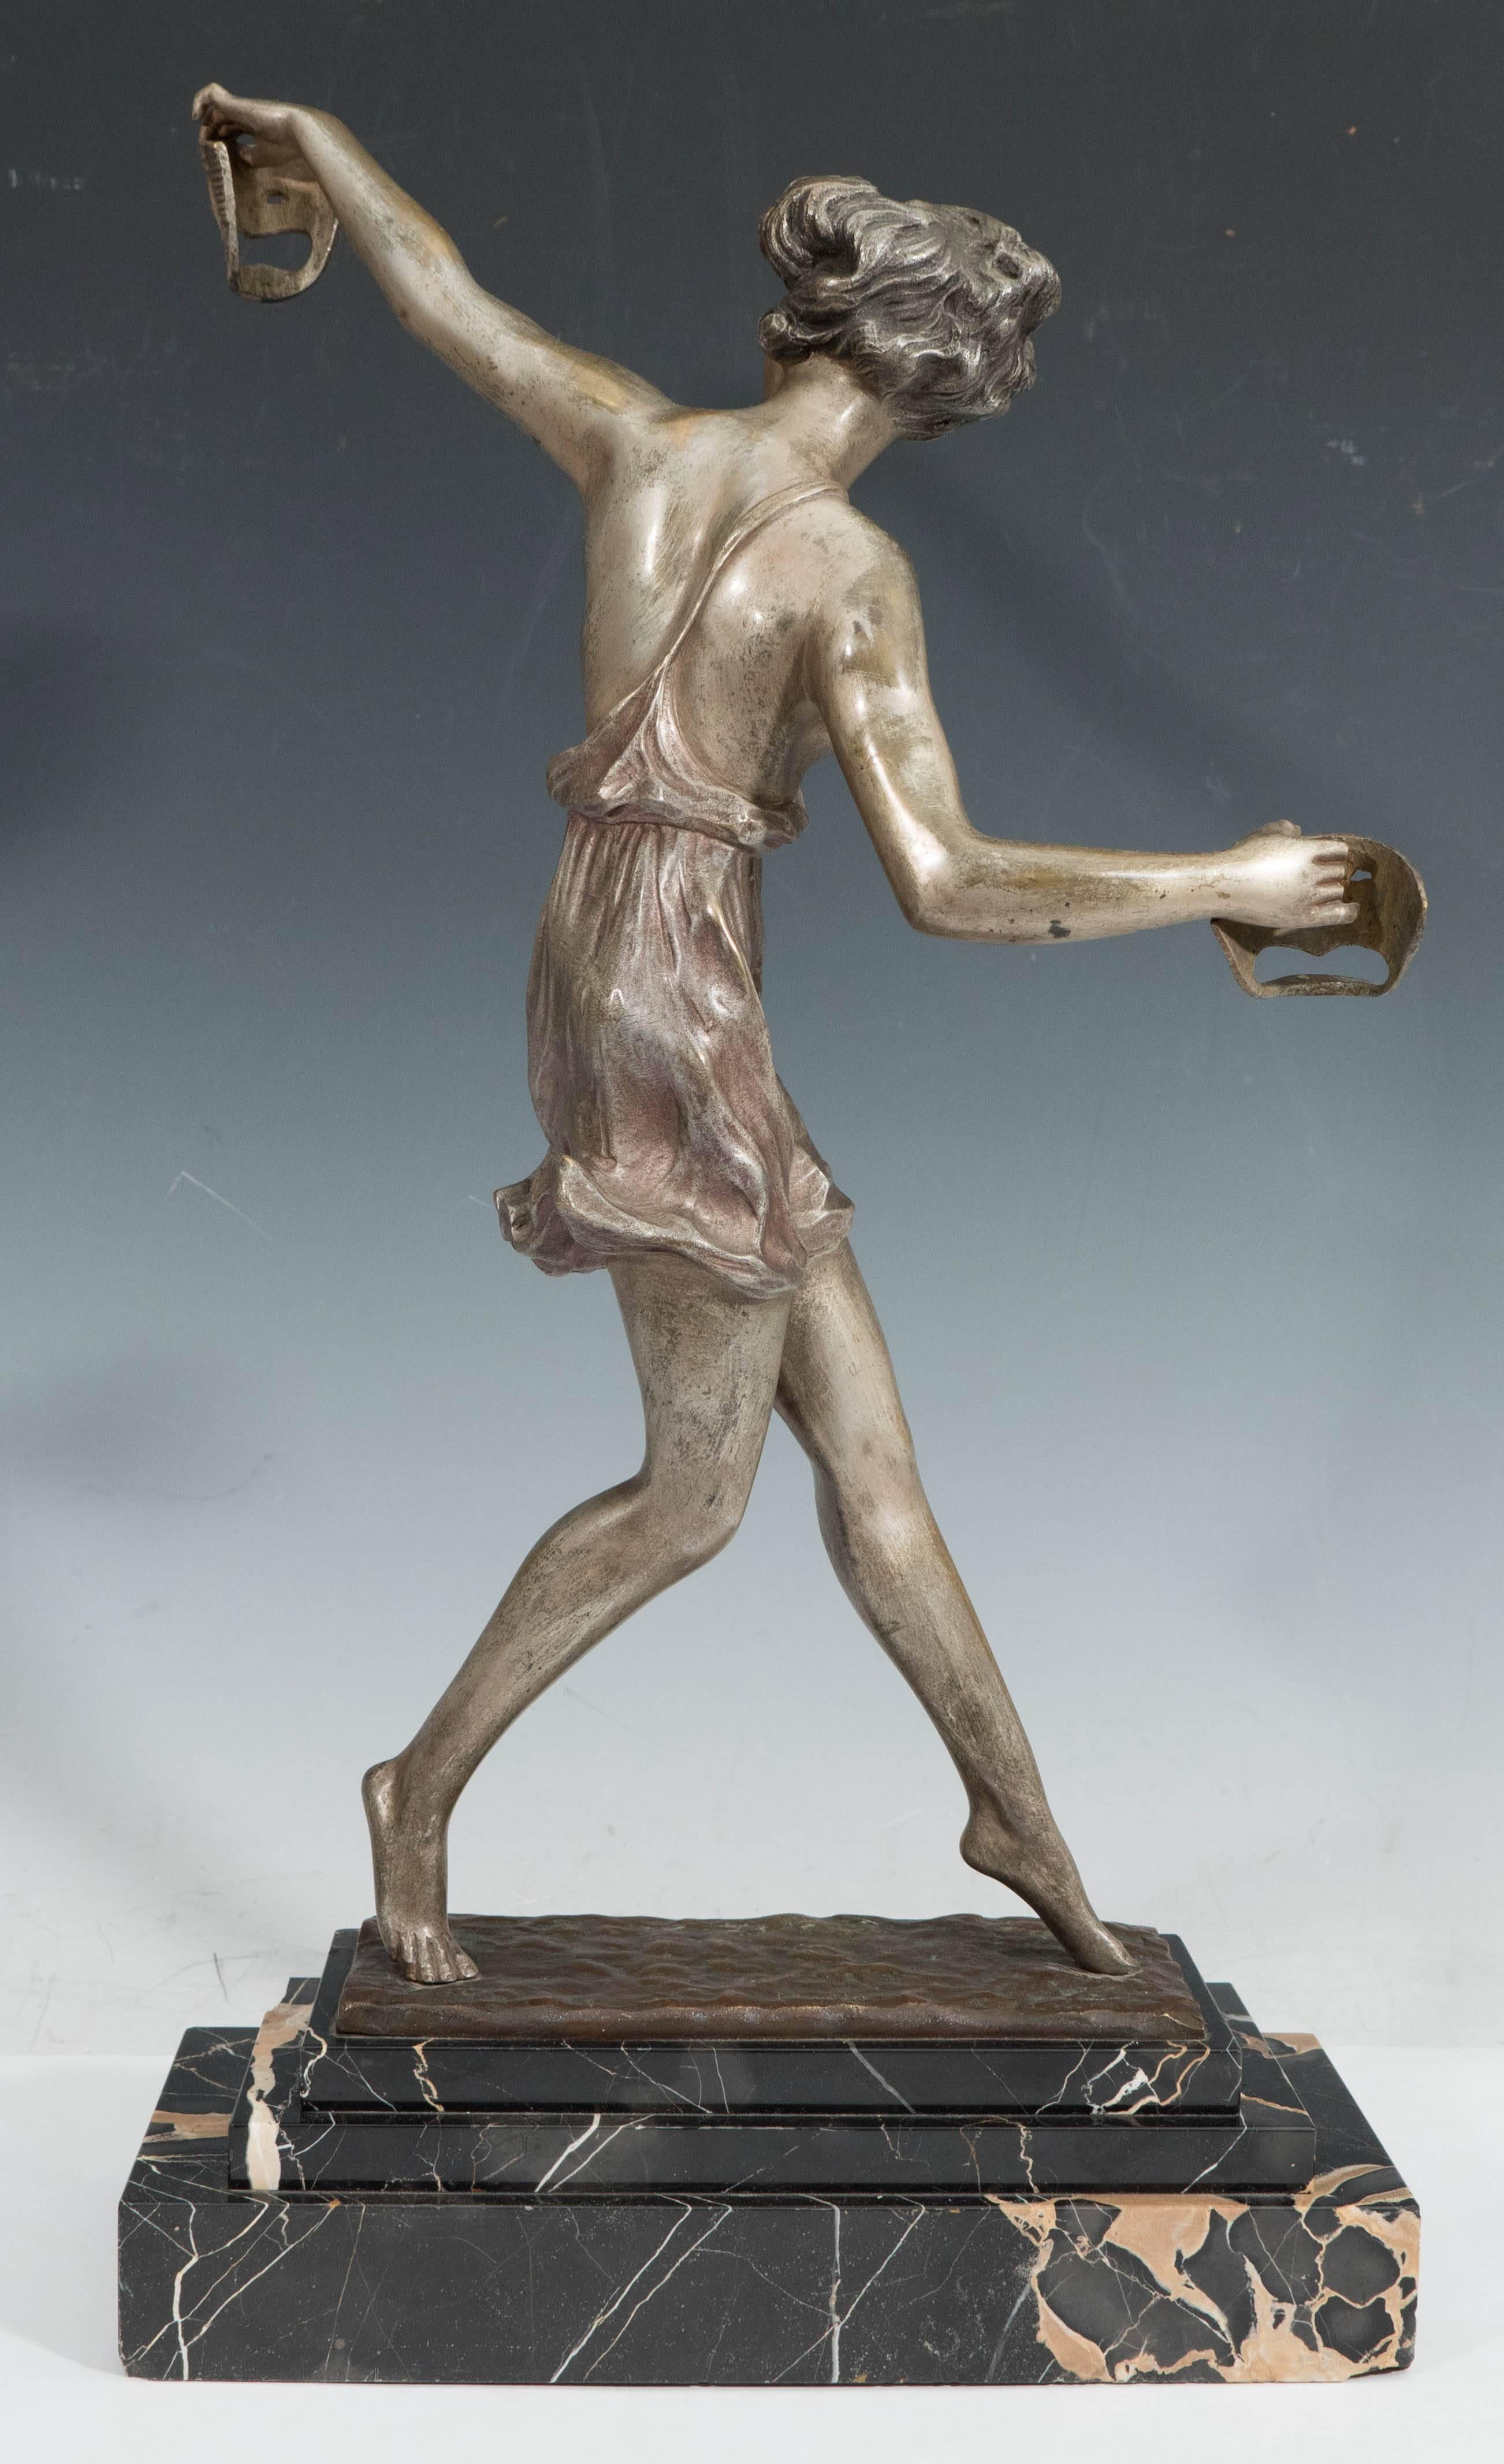 Silver Art Deco Dancer with Comedy & Tragedy Masks, Signed 'Matto' (Marcel Bouraine) For Sale